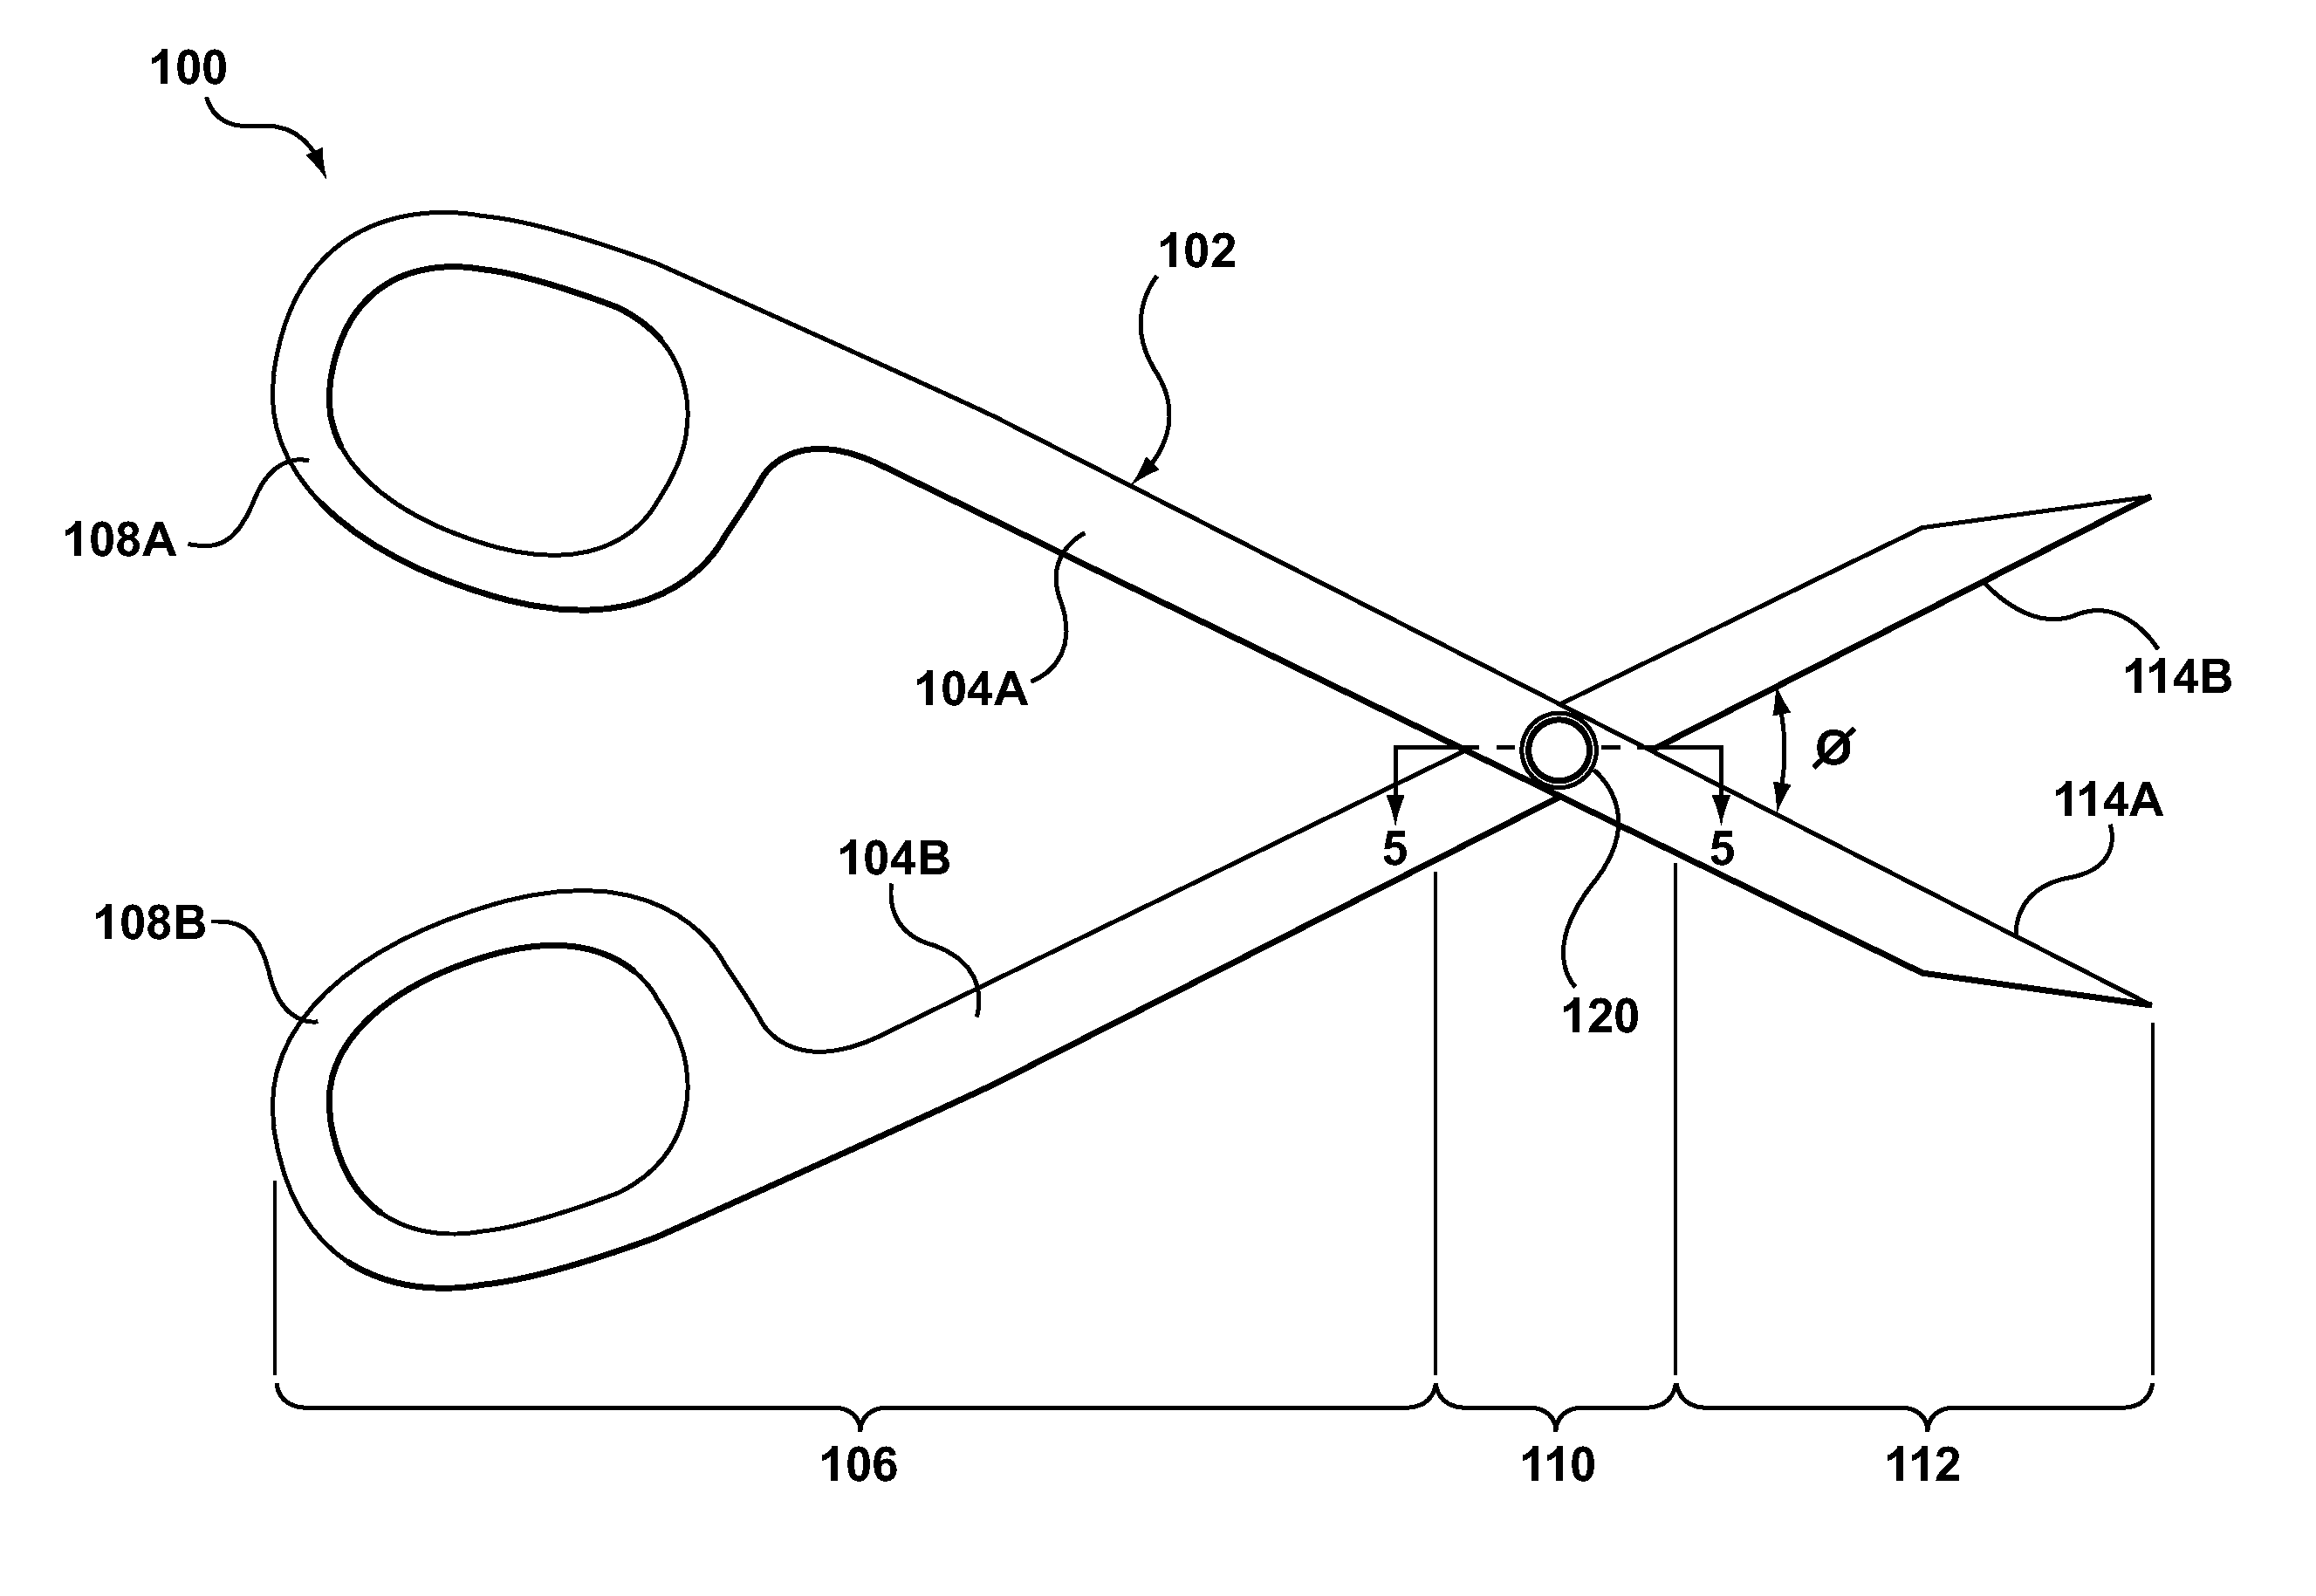 Surgical Tool Having A Programmable Rotary Module For Providing Haptic Feedback